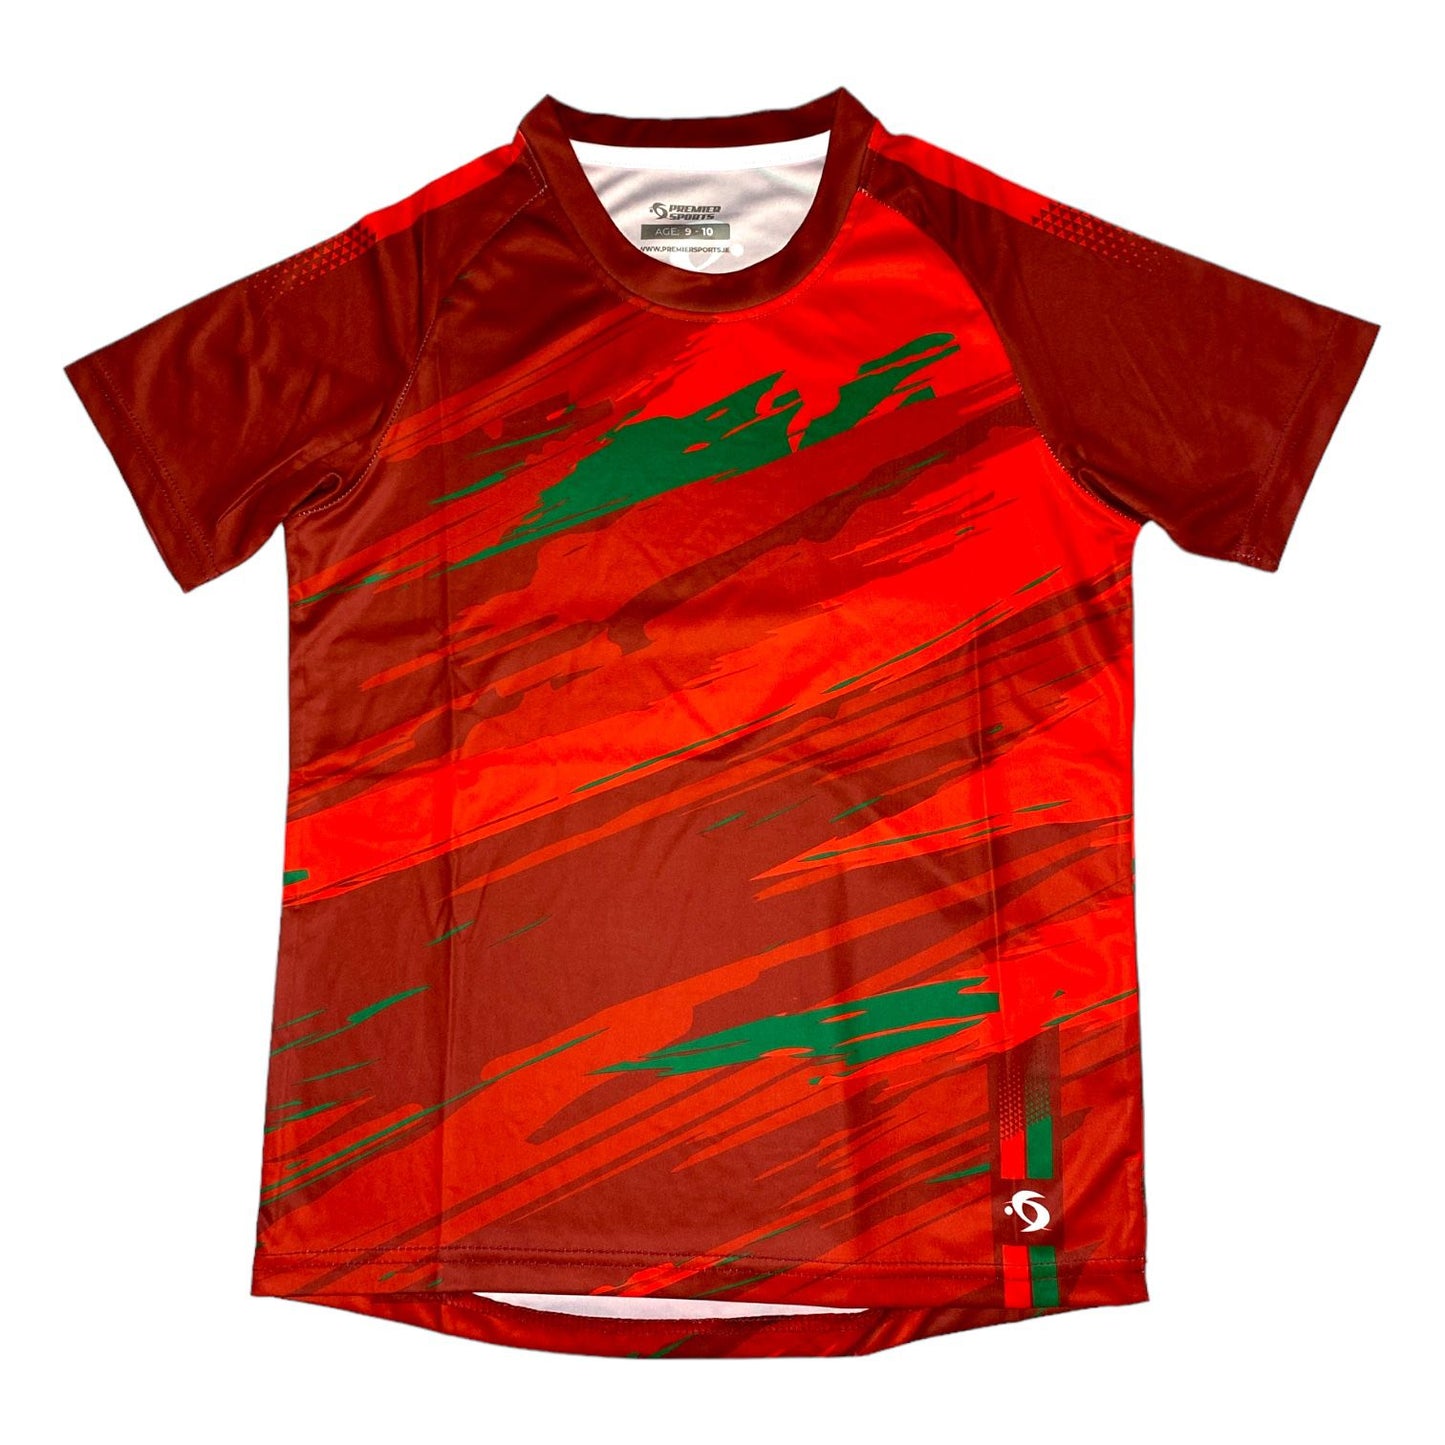 PREMIER SPORTS TRAINING JERSEY 24 - RED/GREEN